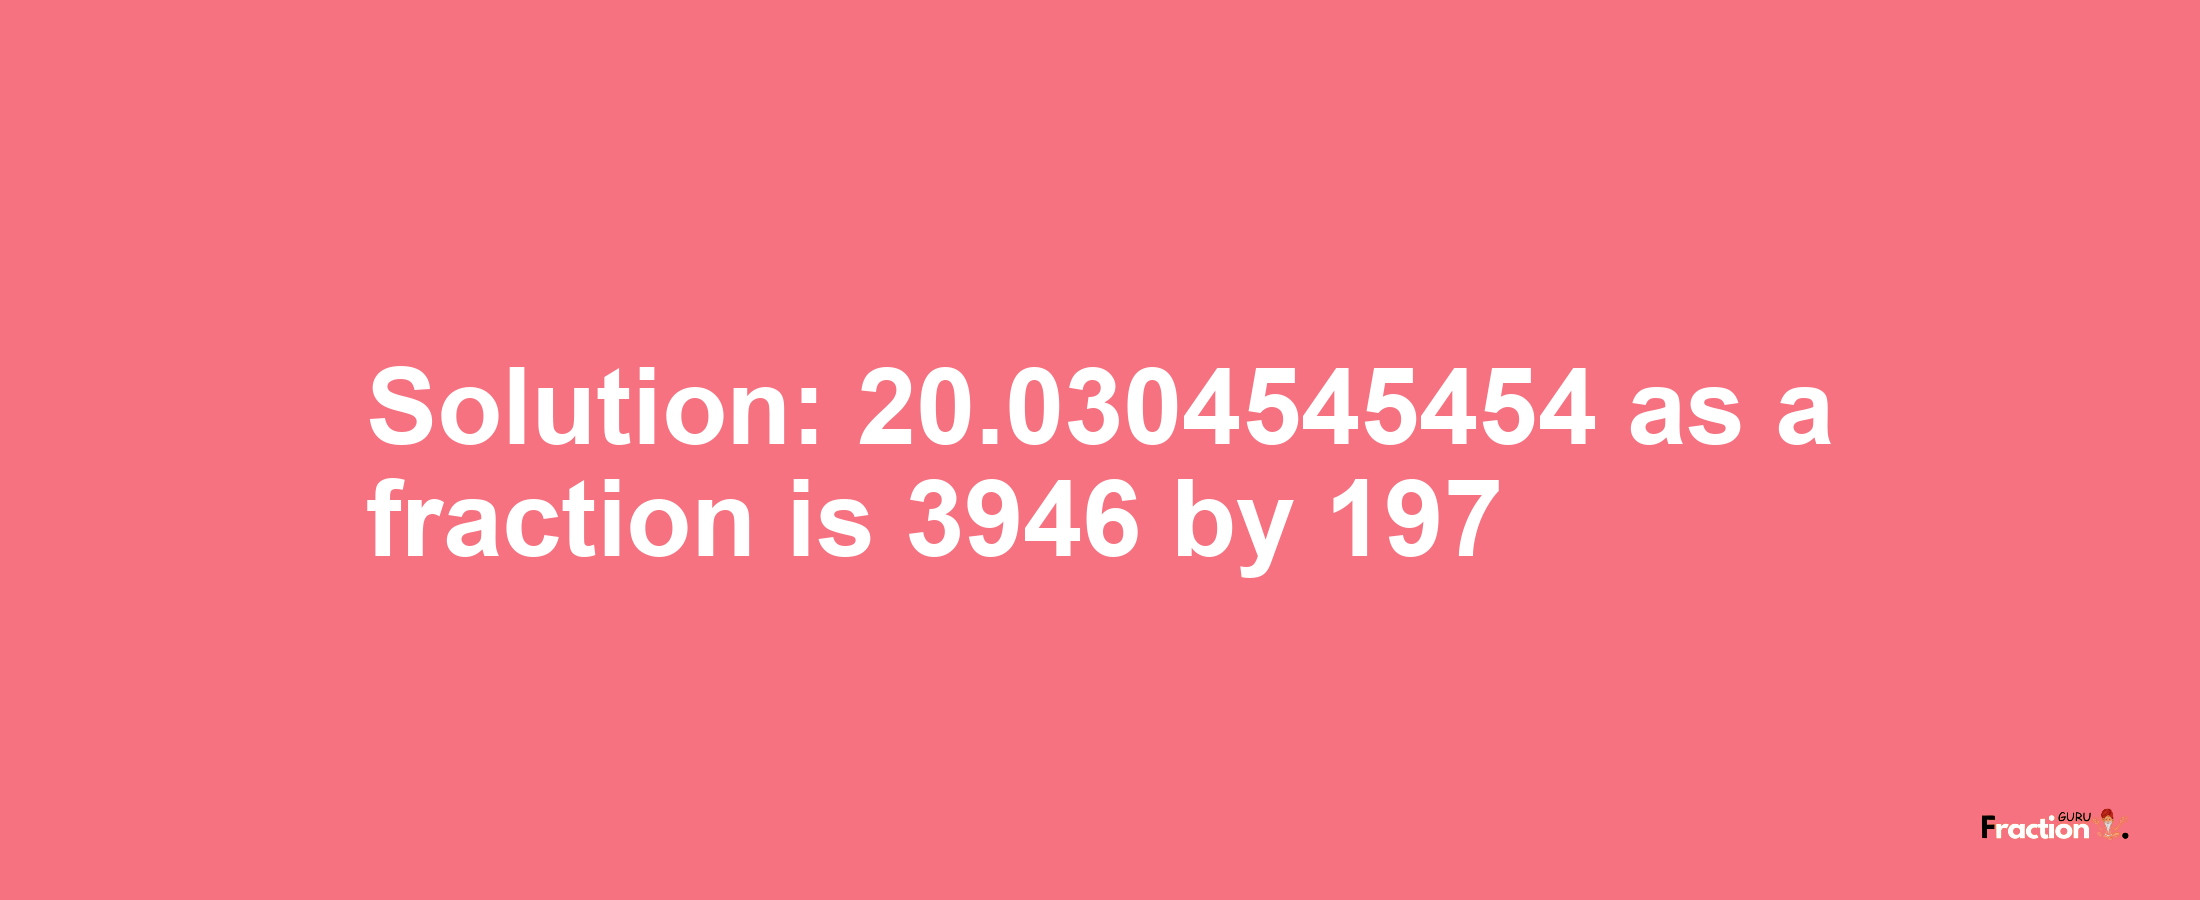 Solution:20.0304545454 as a fraction is 3946/197